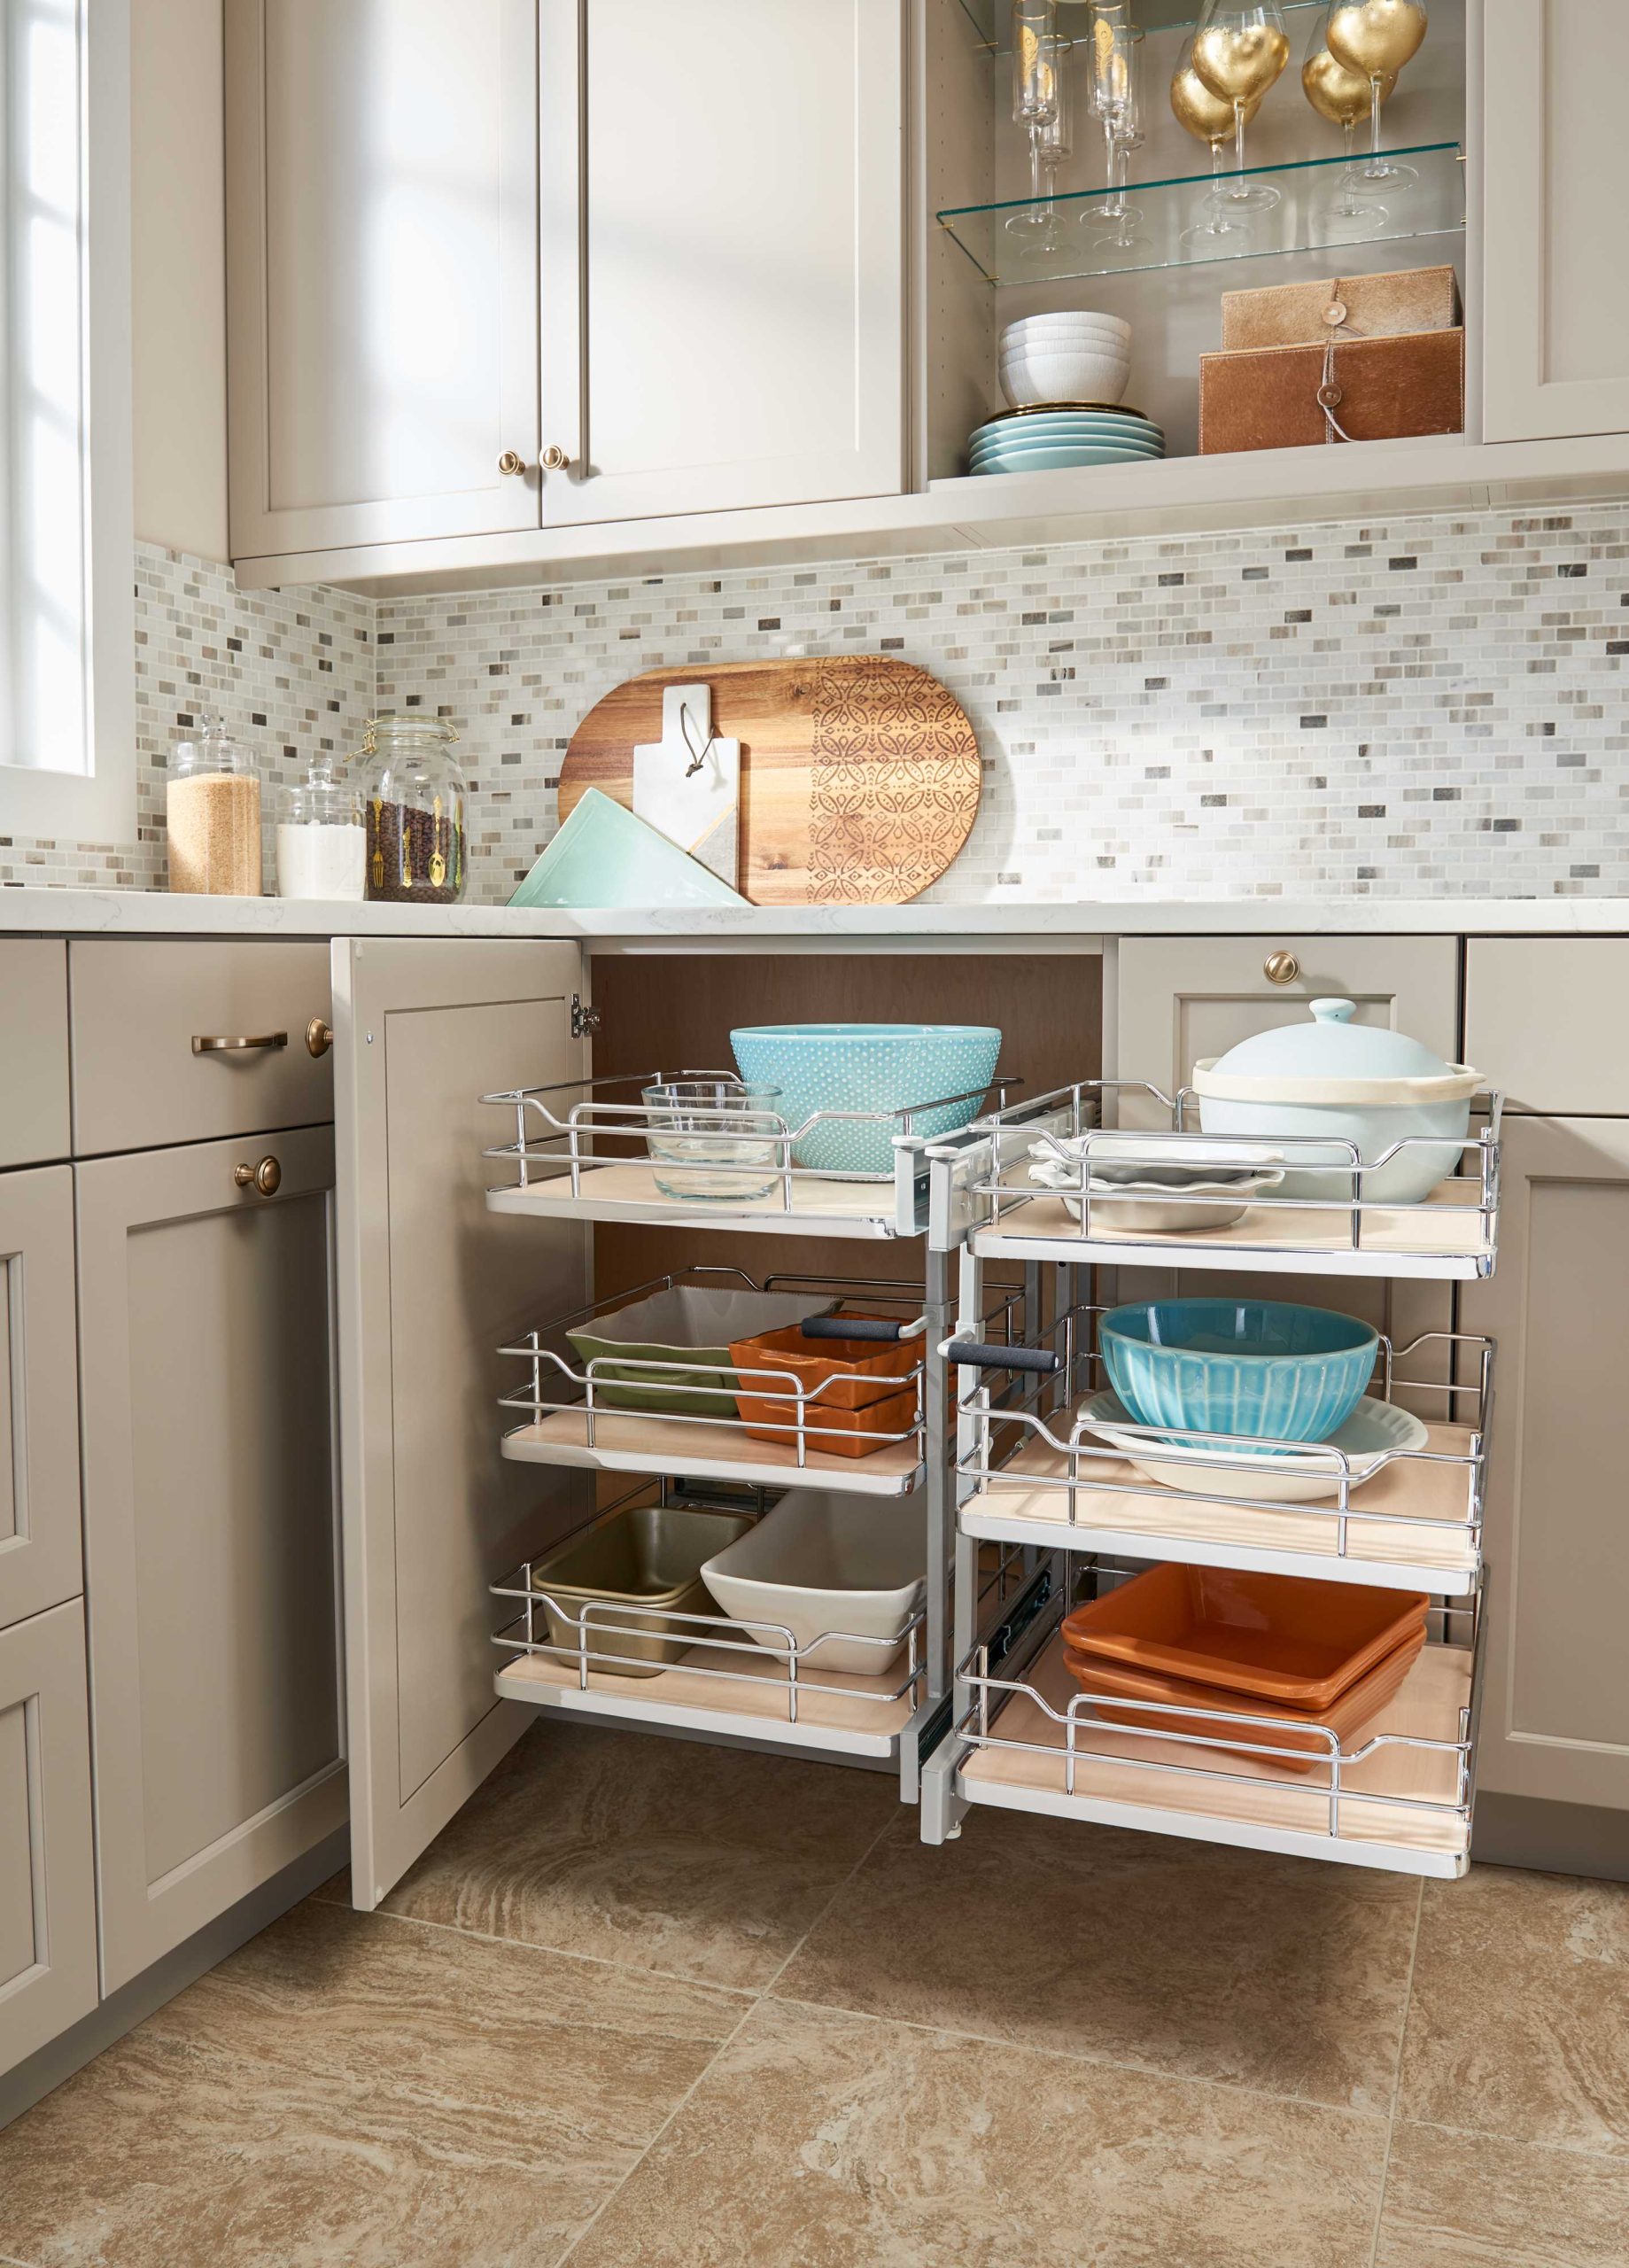 Column: Space saving ideas for your kitchen • Current Publishing